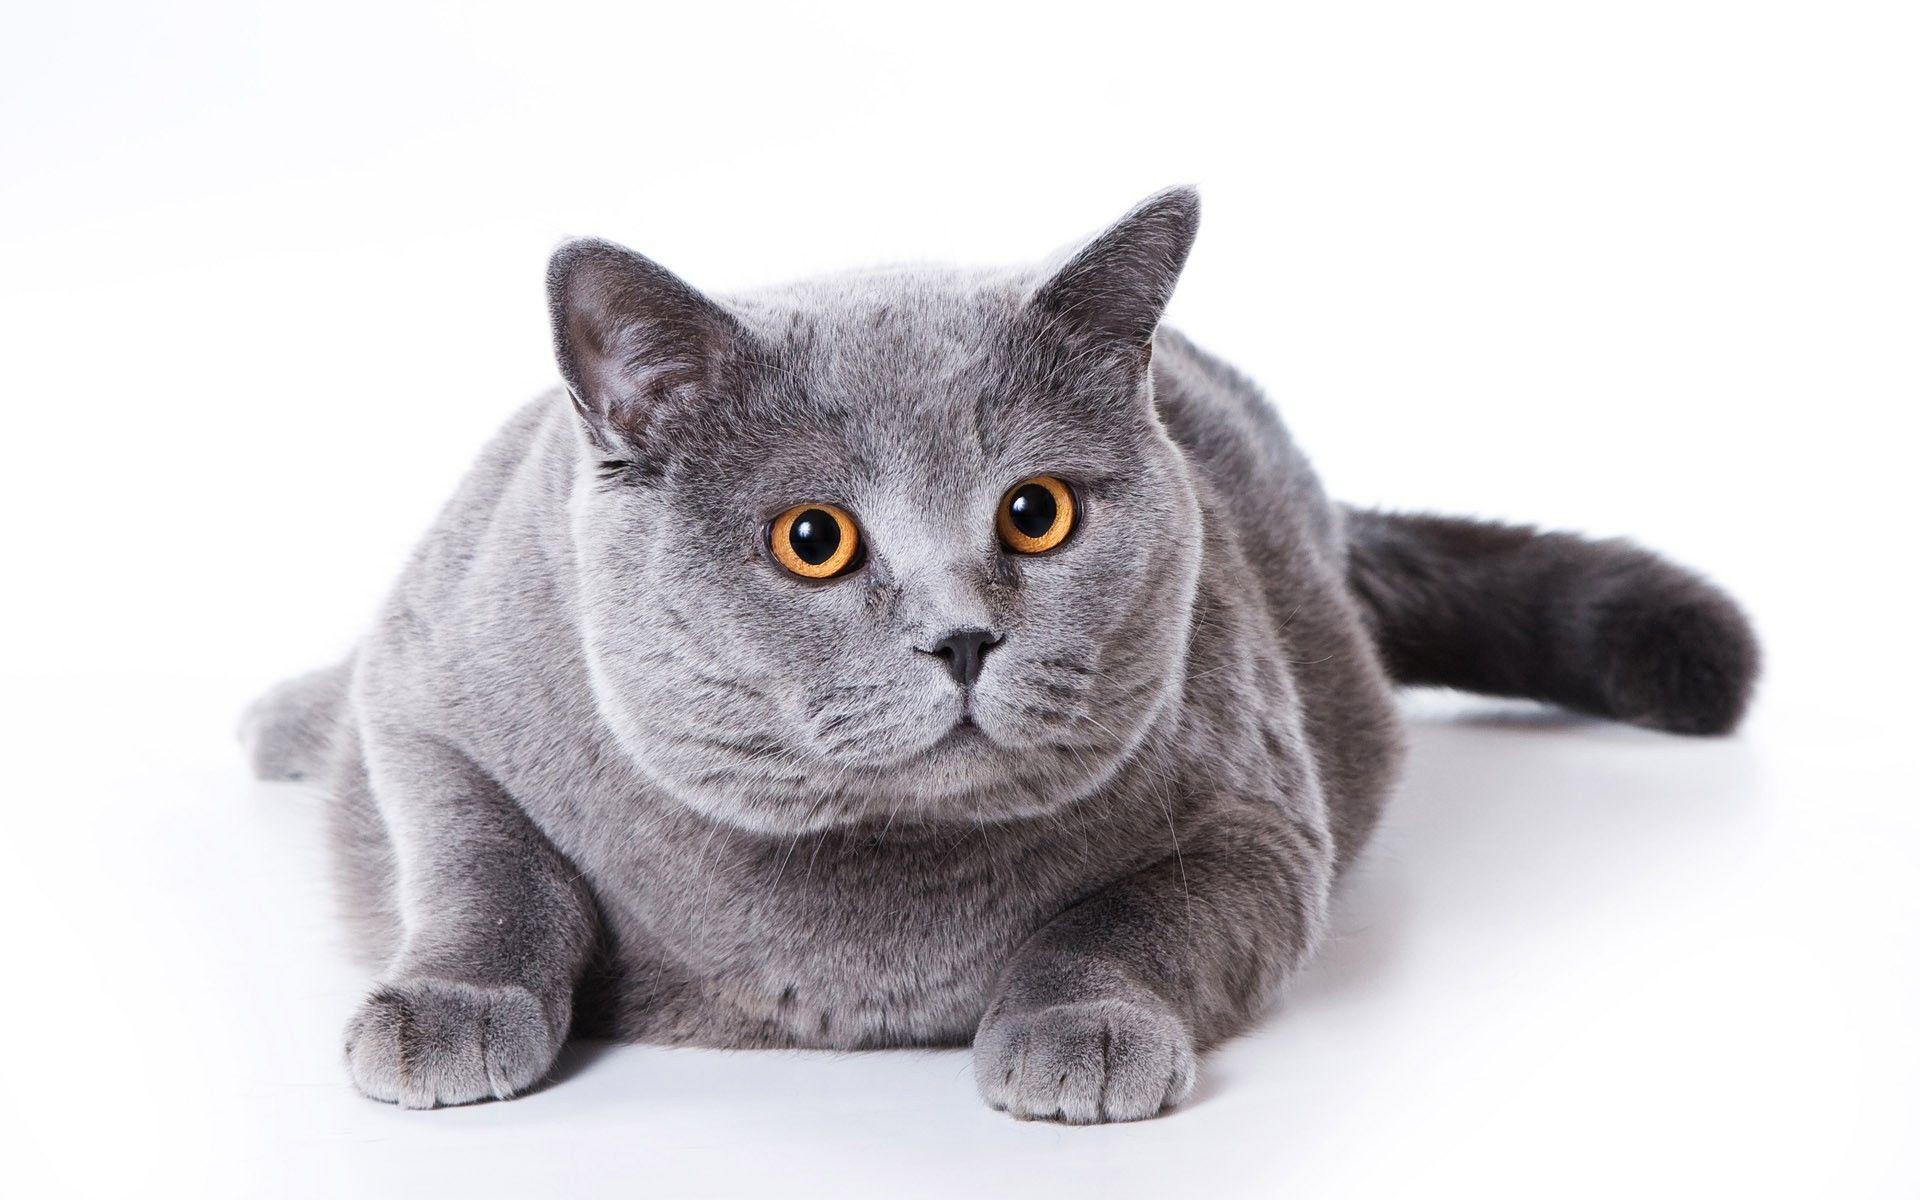 Download Wallpaper British Shorthair, Big Cat, Close Up, Domestic Cat, Gray Cat, Pets, Cats, Cute Animals, British Shorthair Cat For Desktop With Resolution 1920x1200. High Quality HD Picture Wallpaper